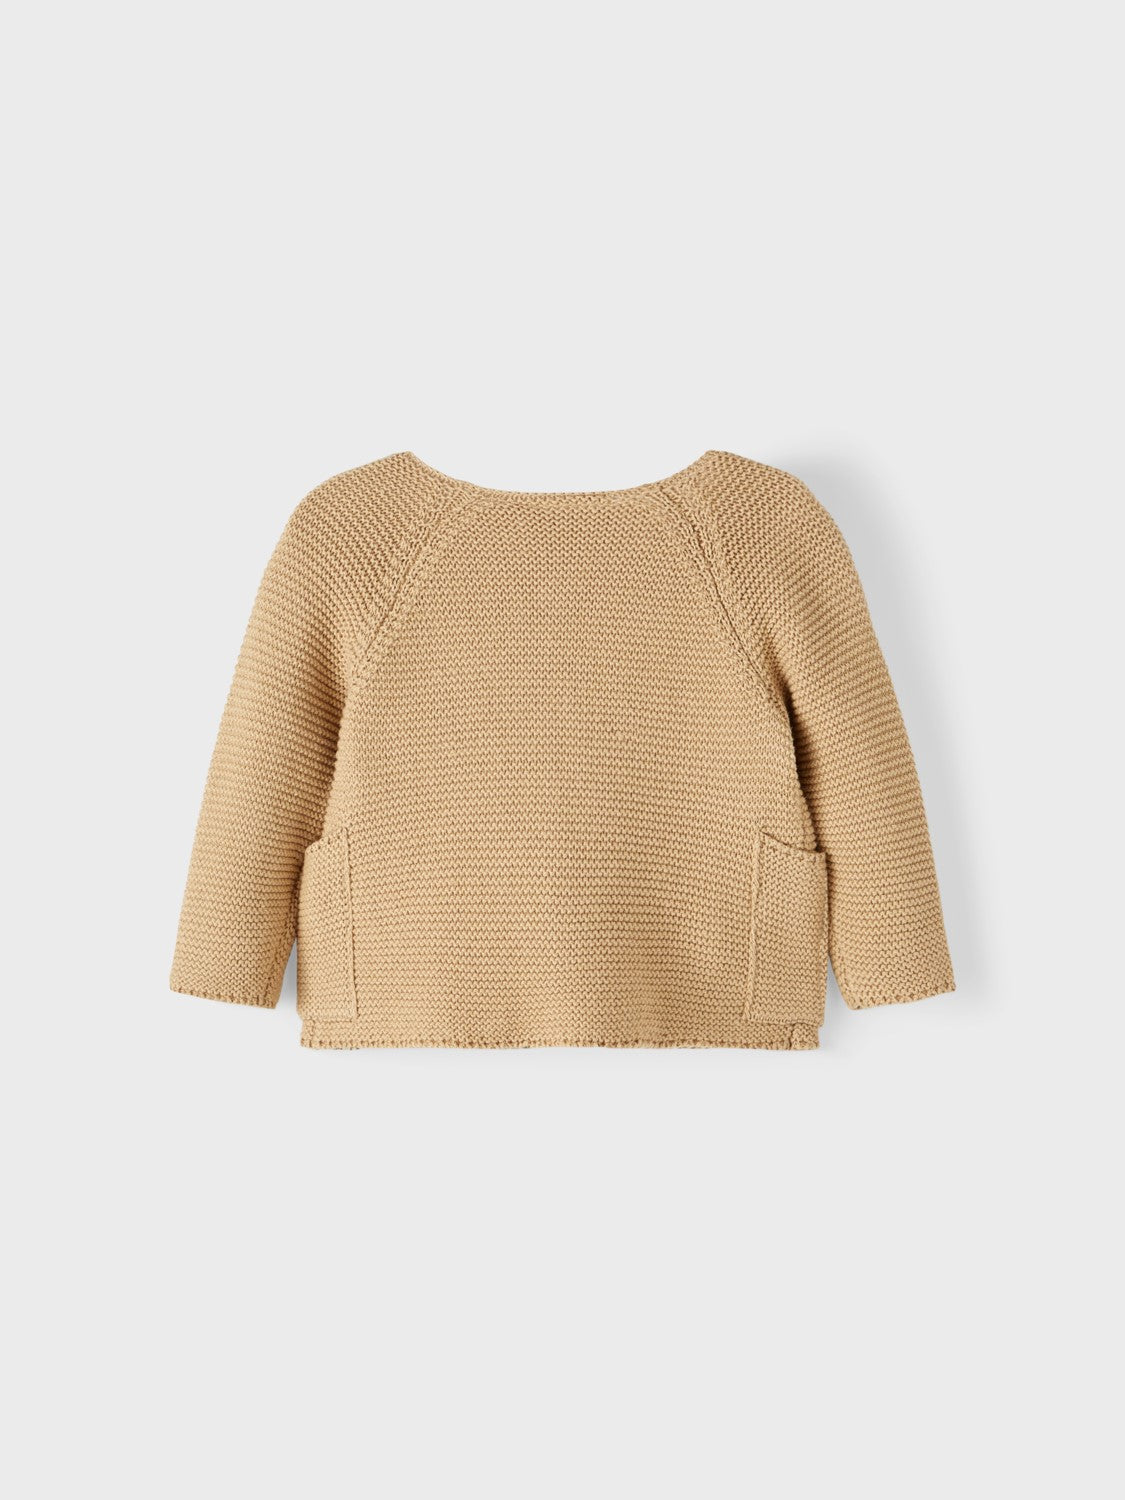 Lil Atelier Laguno Loose Knit - Curds & Whey